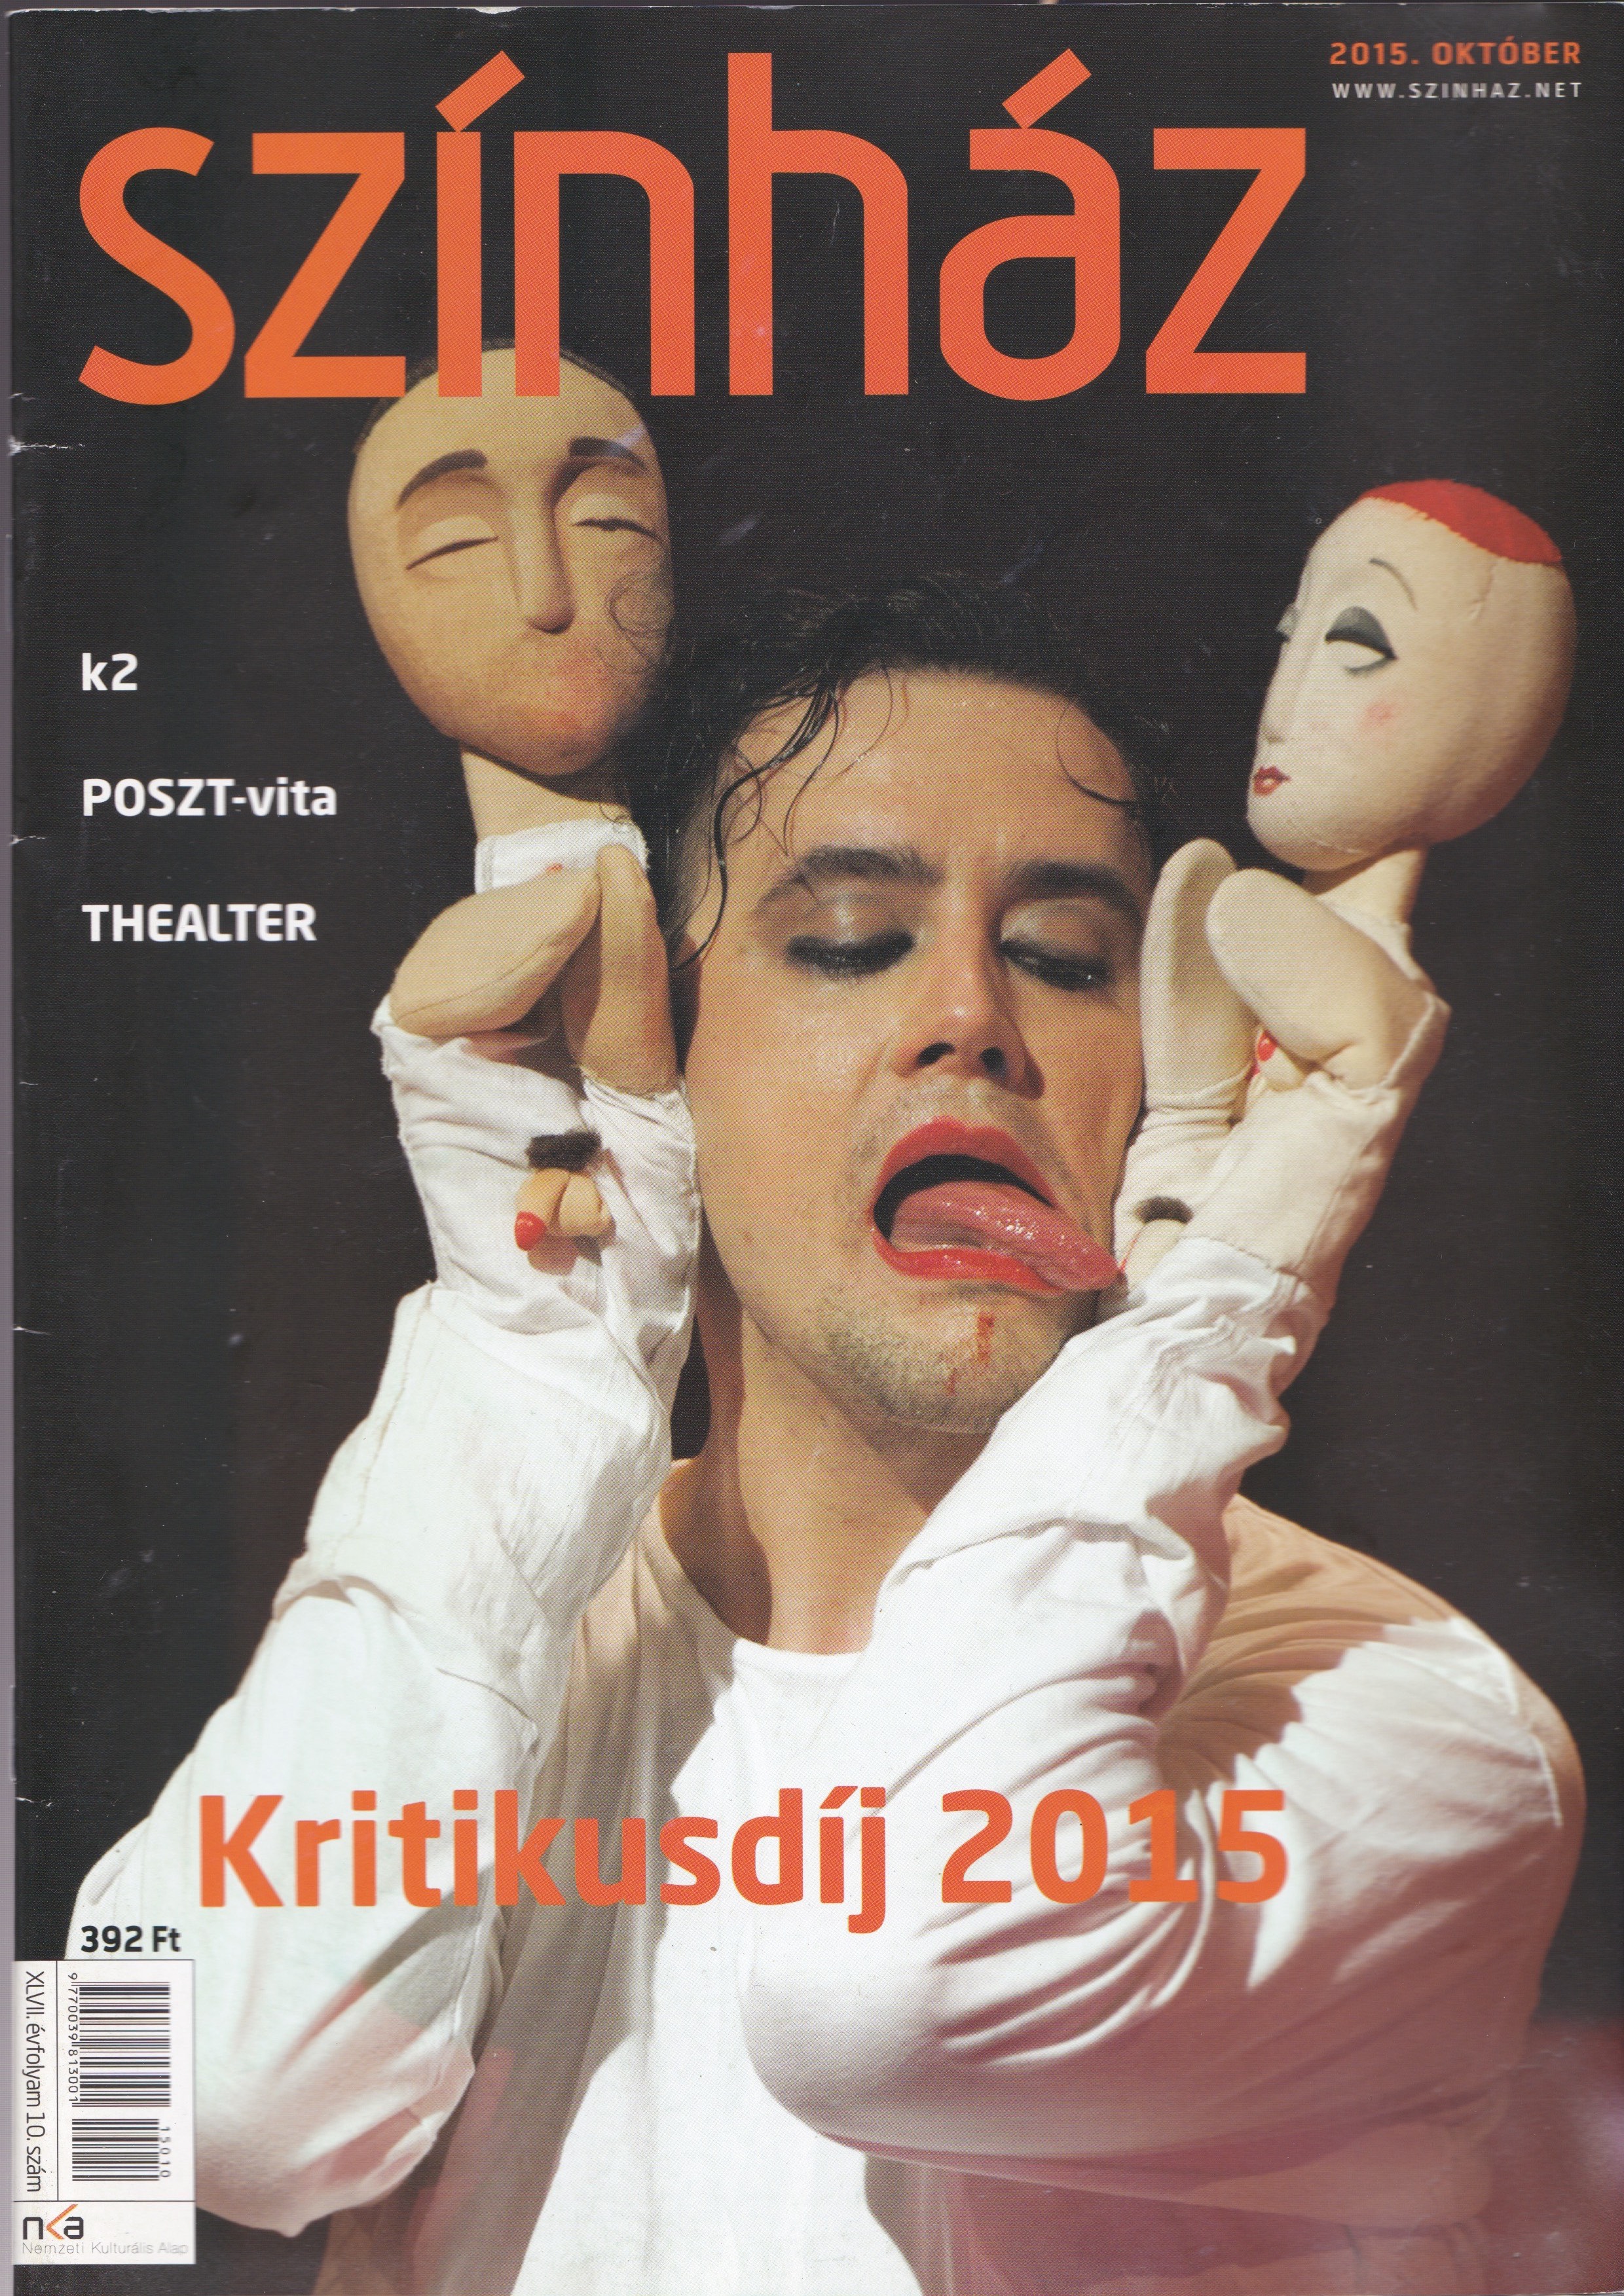 POSZT-poll 2. Cover Image